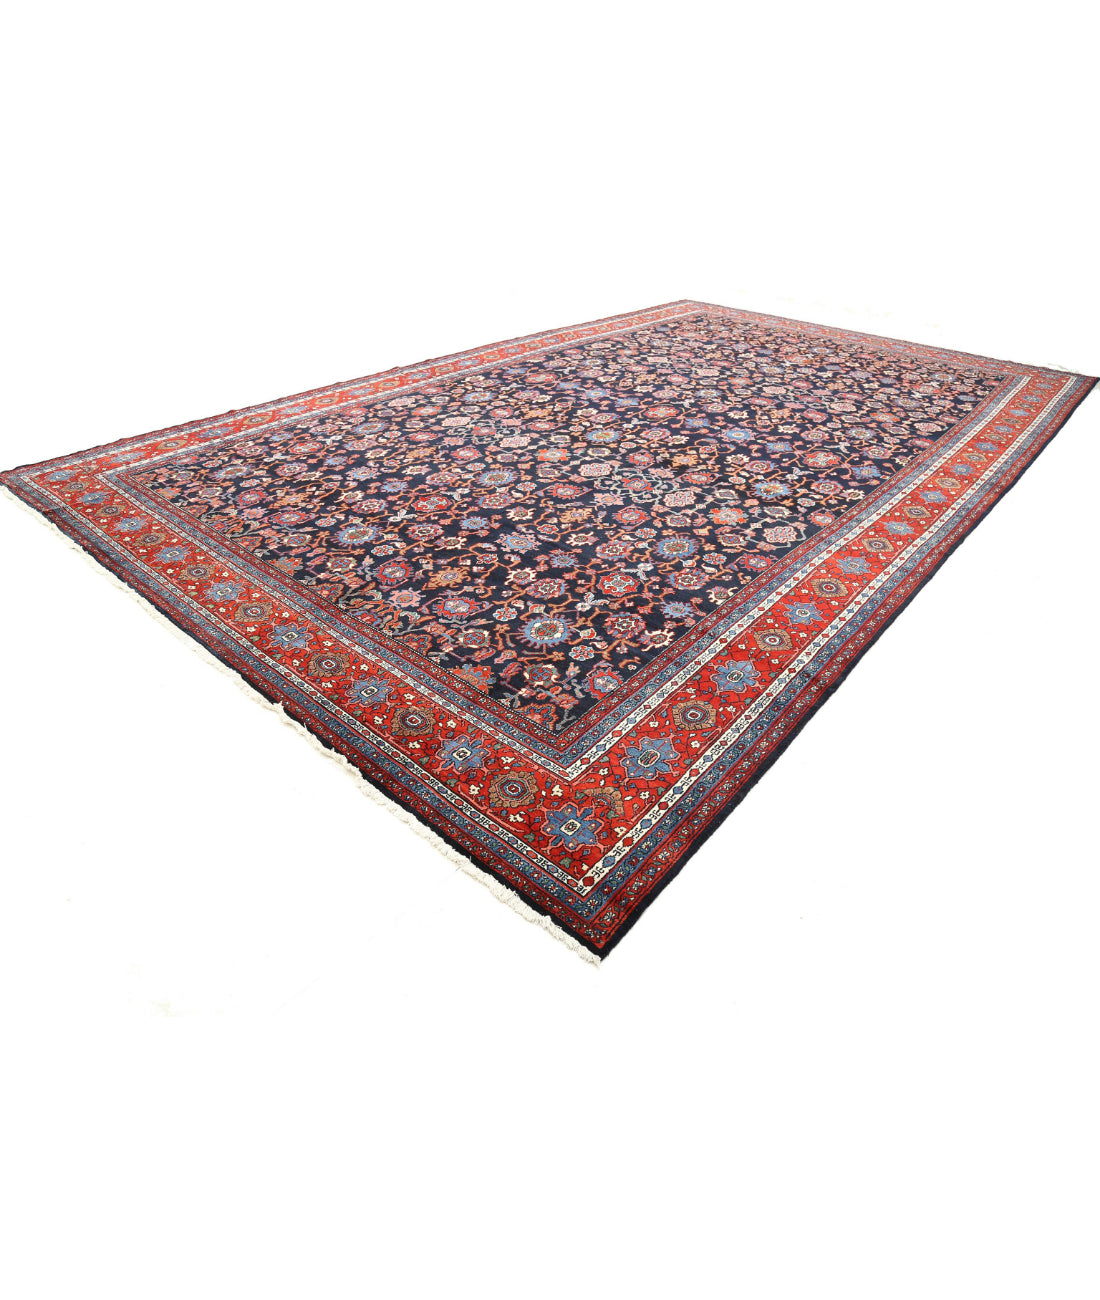 Bibikabad 12'8'' X 21'0'' Hand-Knotted Wool Rug 12'8'' x 21'0'' (380 X 630) / Black / Red